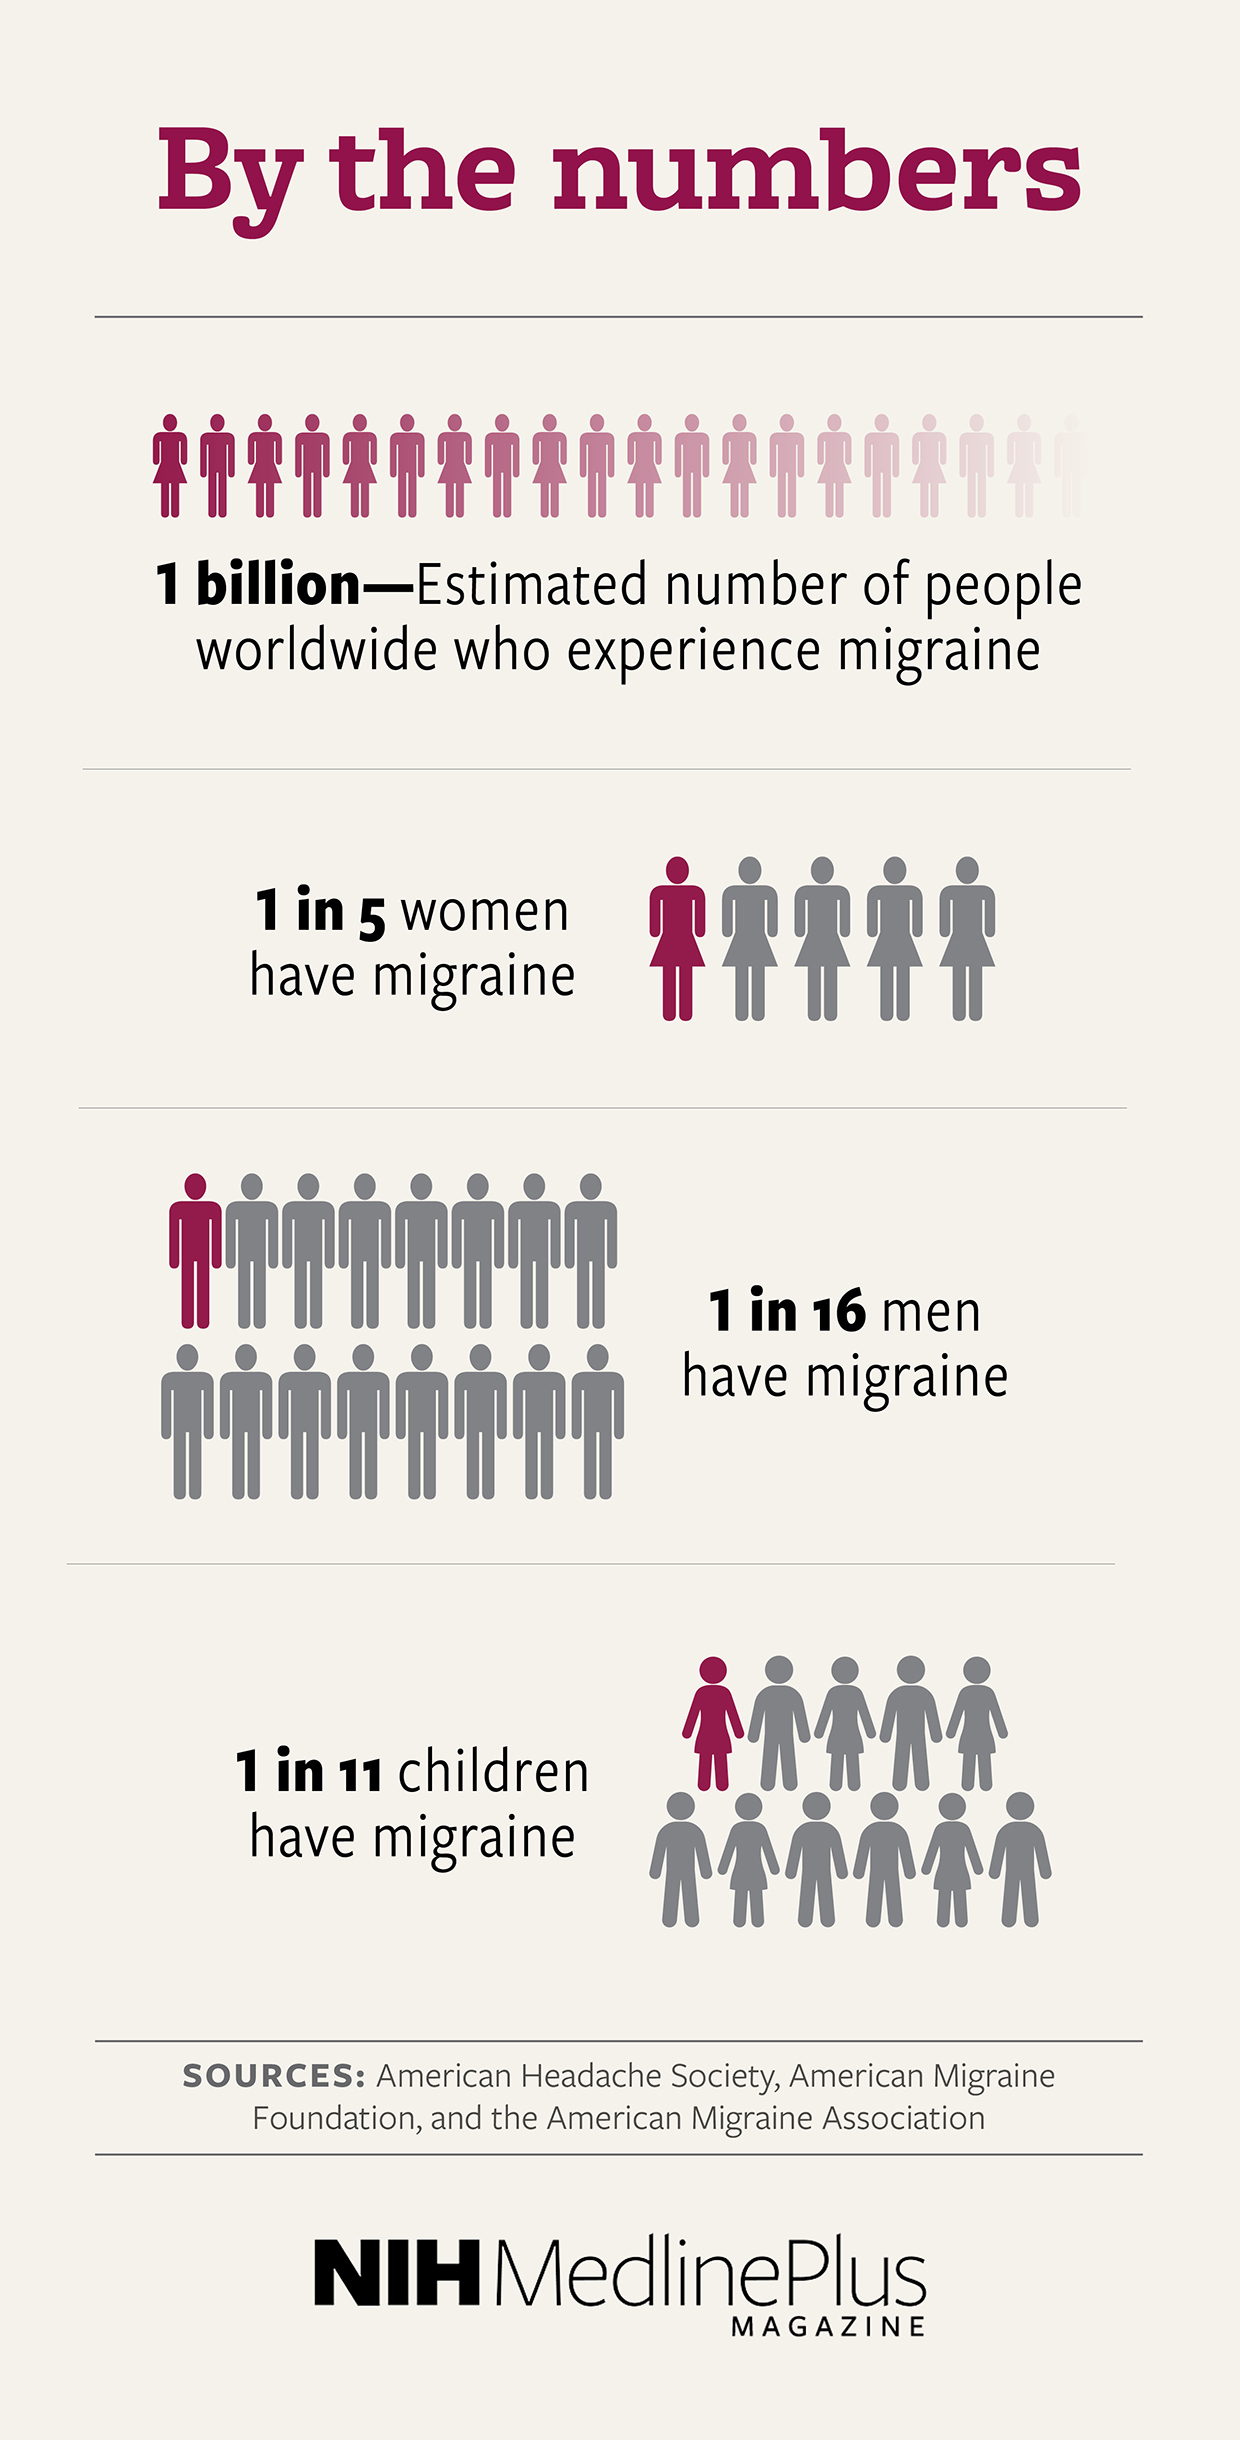 By the numbers
1 billion―estimated number of people worldwide who experience migraine 
1 in 5 women have migraine
1 in 16 men have migraine
1 in 11 children have migraine. 
 
 
    